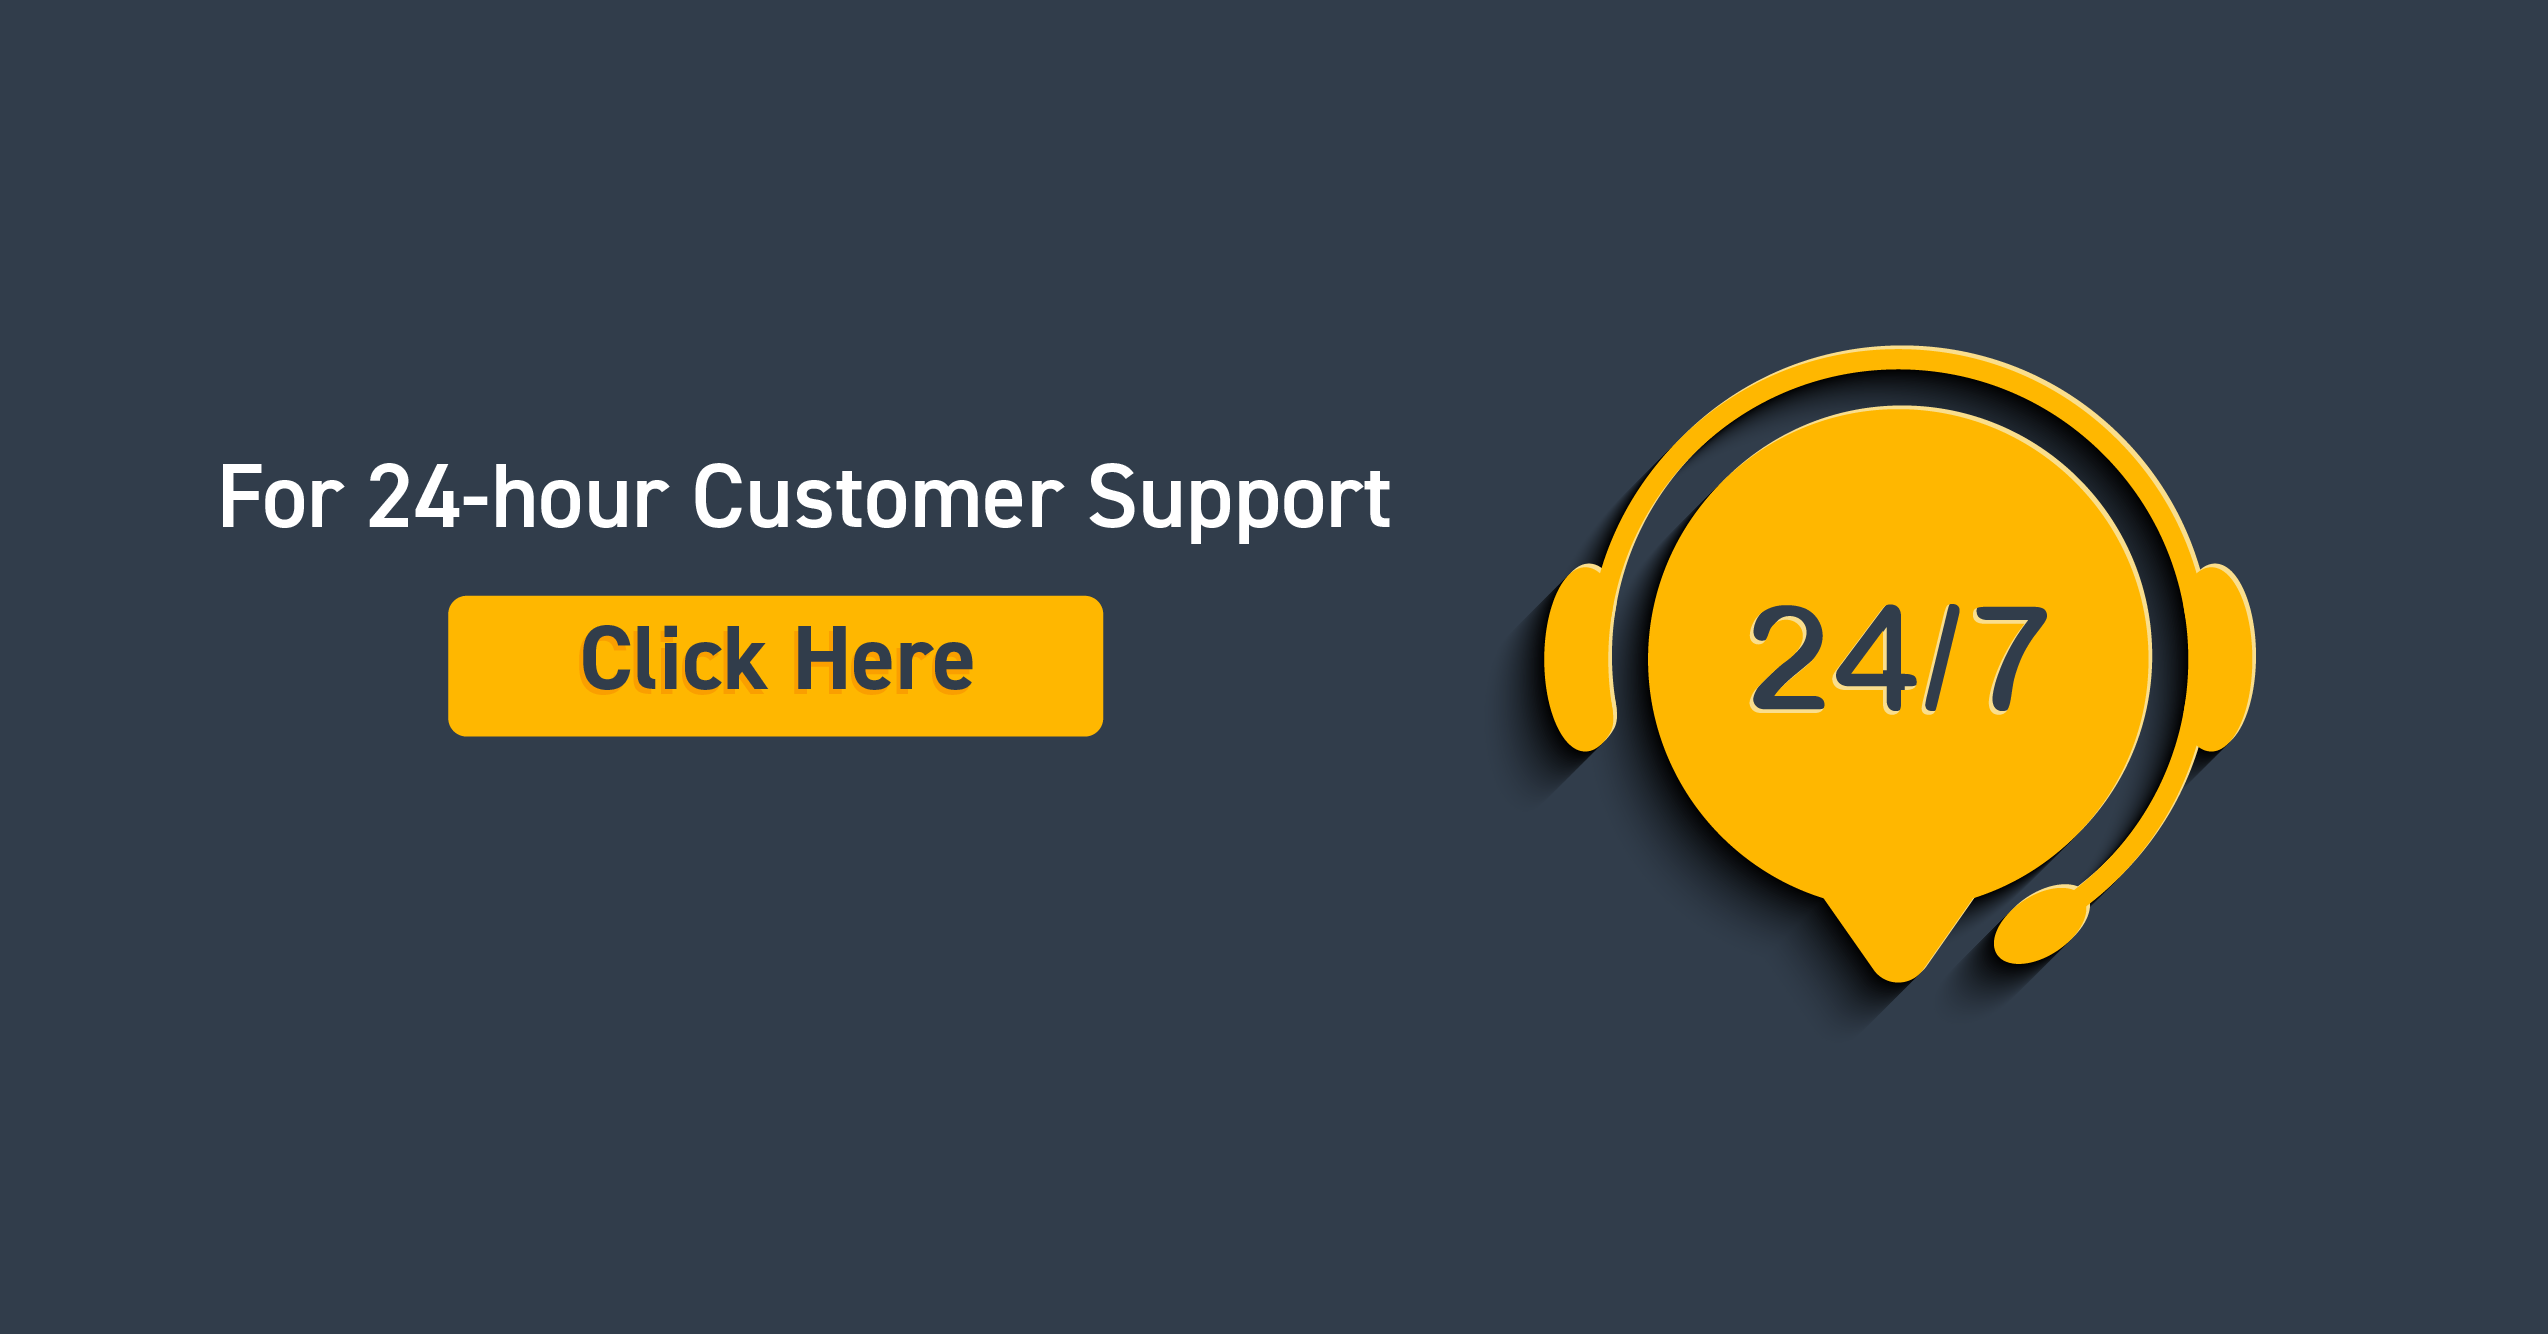 text reads for 24-hour customer support click here which links to the customer support page with a yellow customer support icon and blue background